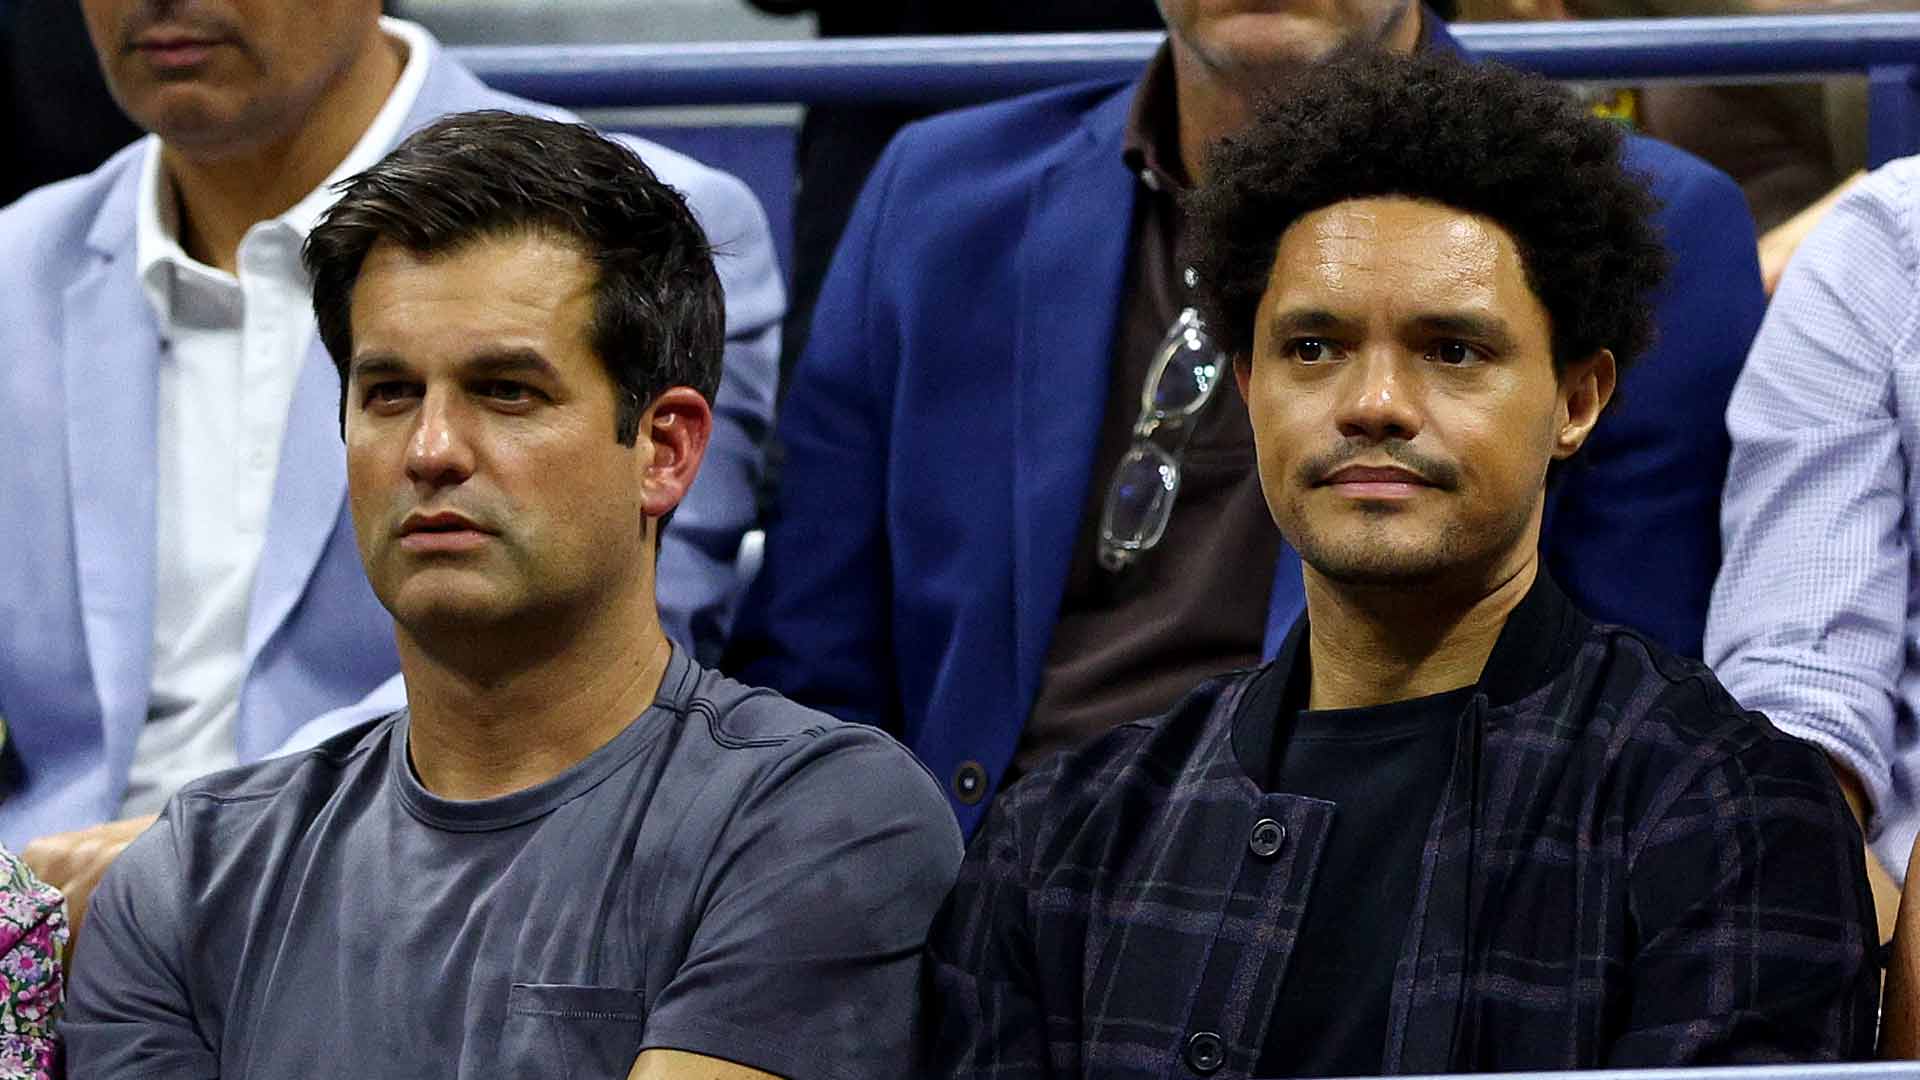 Comedian Trevor Noah (right) was in attendance for the <a href='https://www.atptour.com/en/tournaments/us-open/560/overview'>US Open</a> quarter-finals Tuesday night.